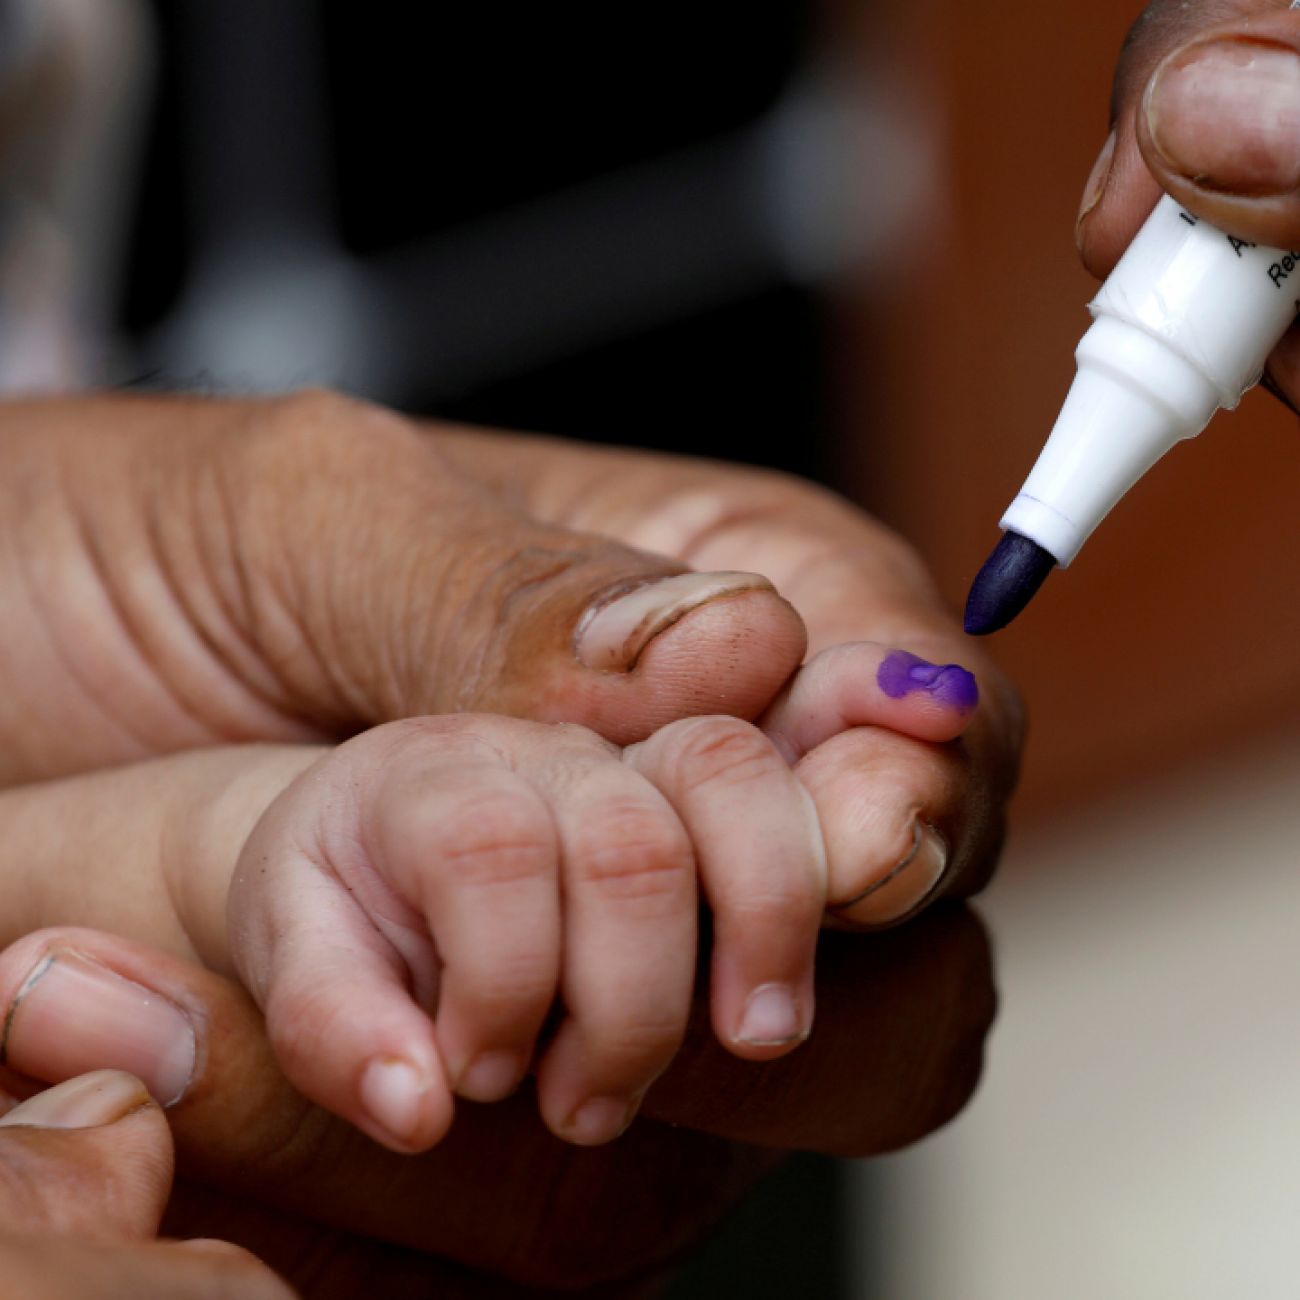 A close-up image of a child's hand being marked with a purple pen after he is administered polio vaccine drops, during an anti-polio campaign in Karachi, Pakistan, on July 20, 2020. 